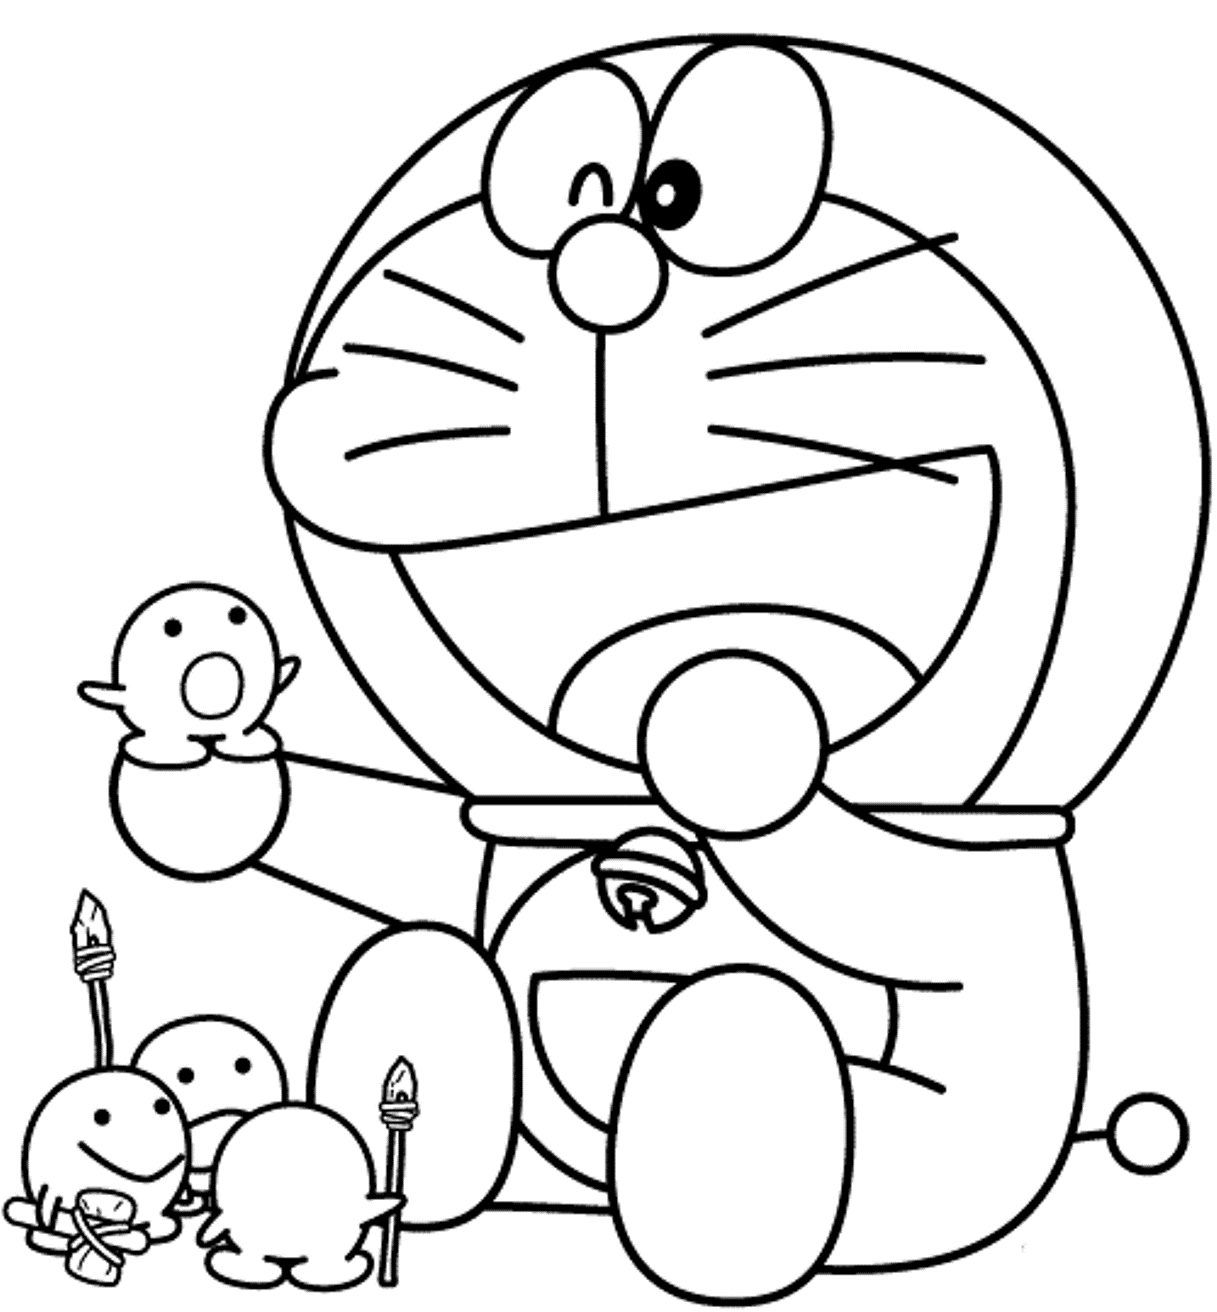 Cartoon Coloring Pages   Best Coloring Pages For Kids